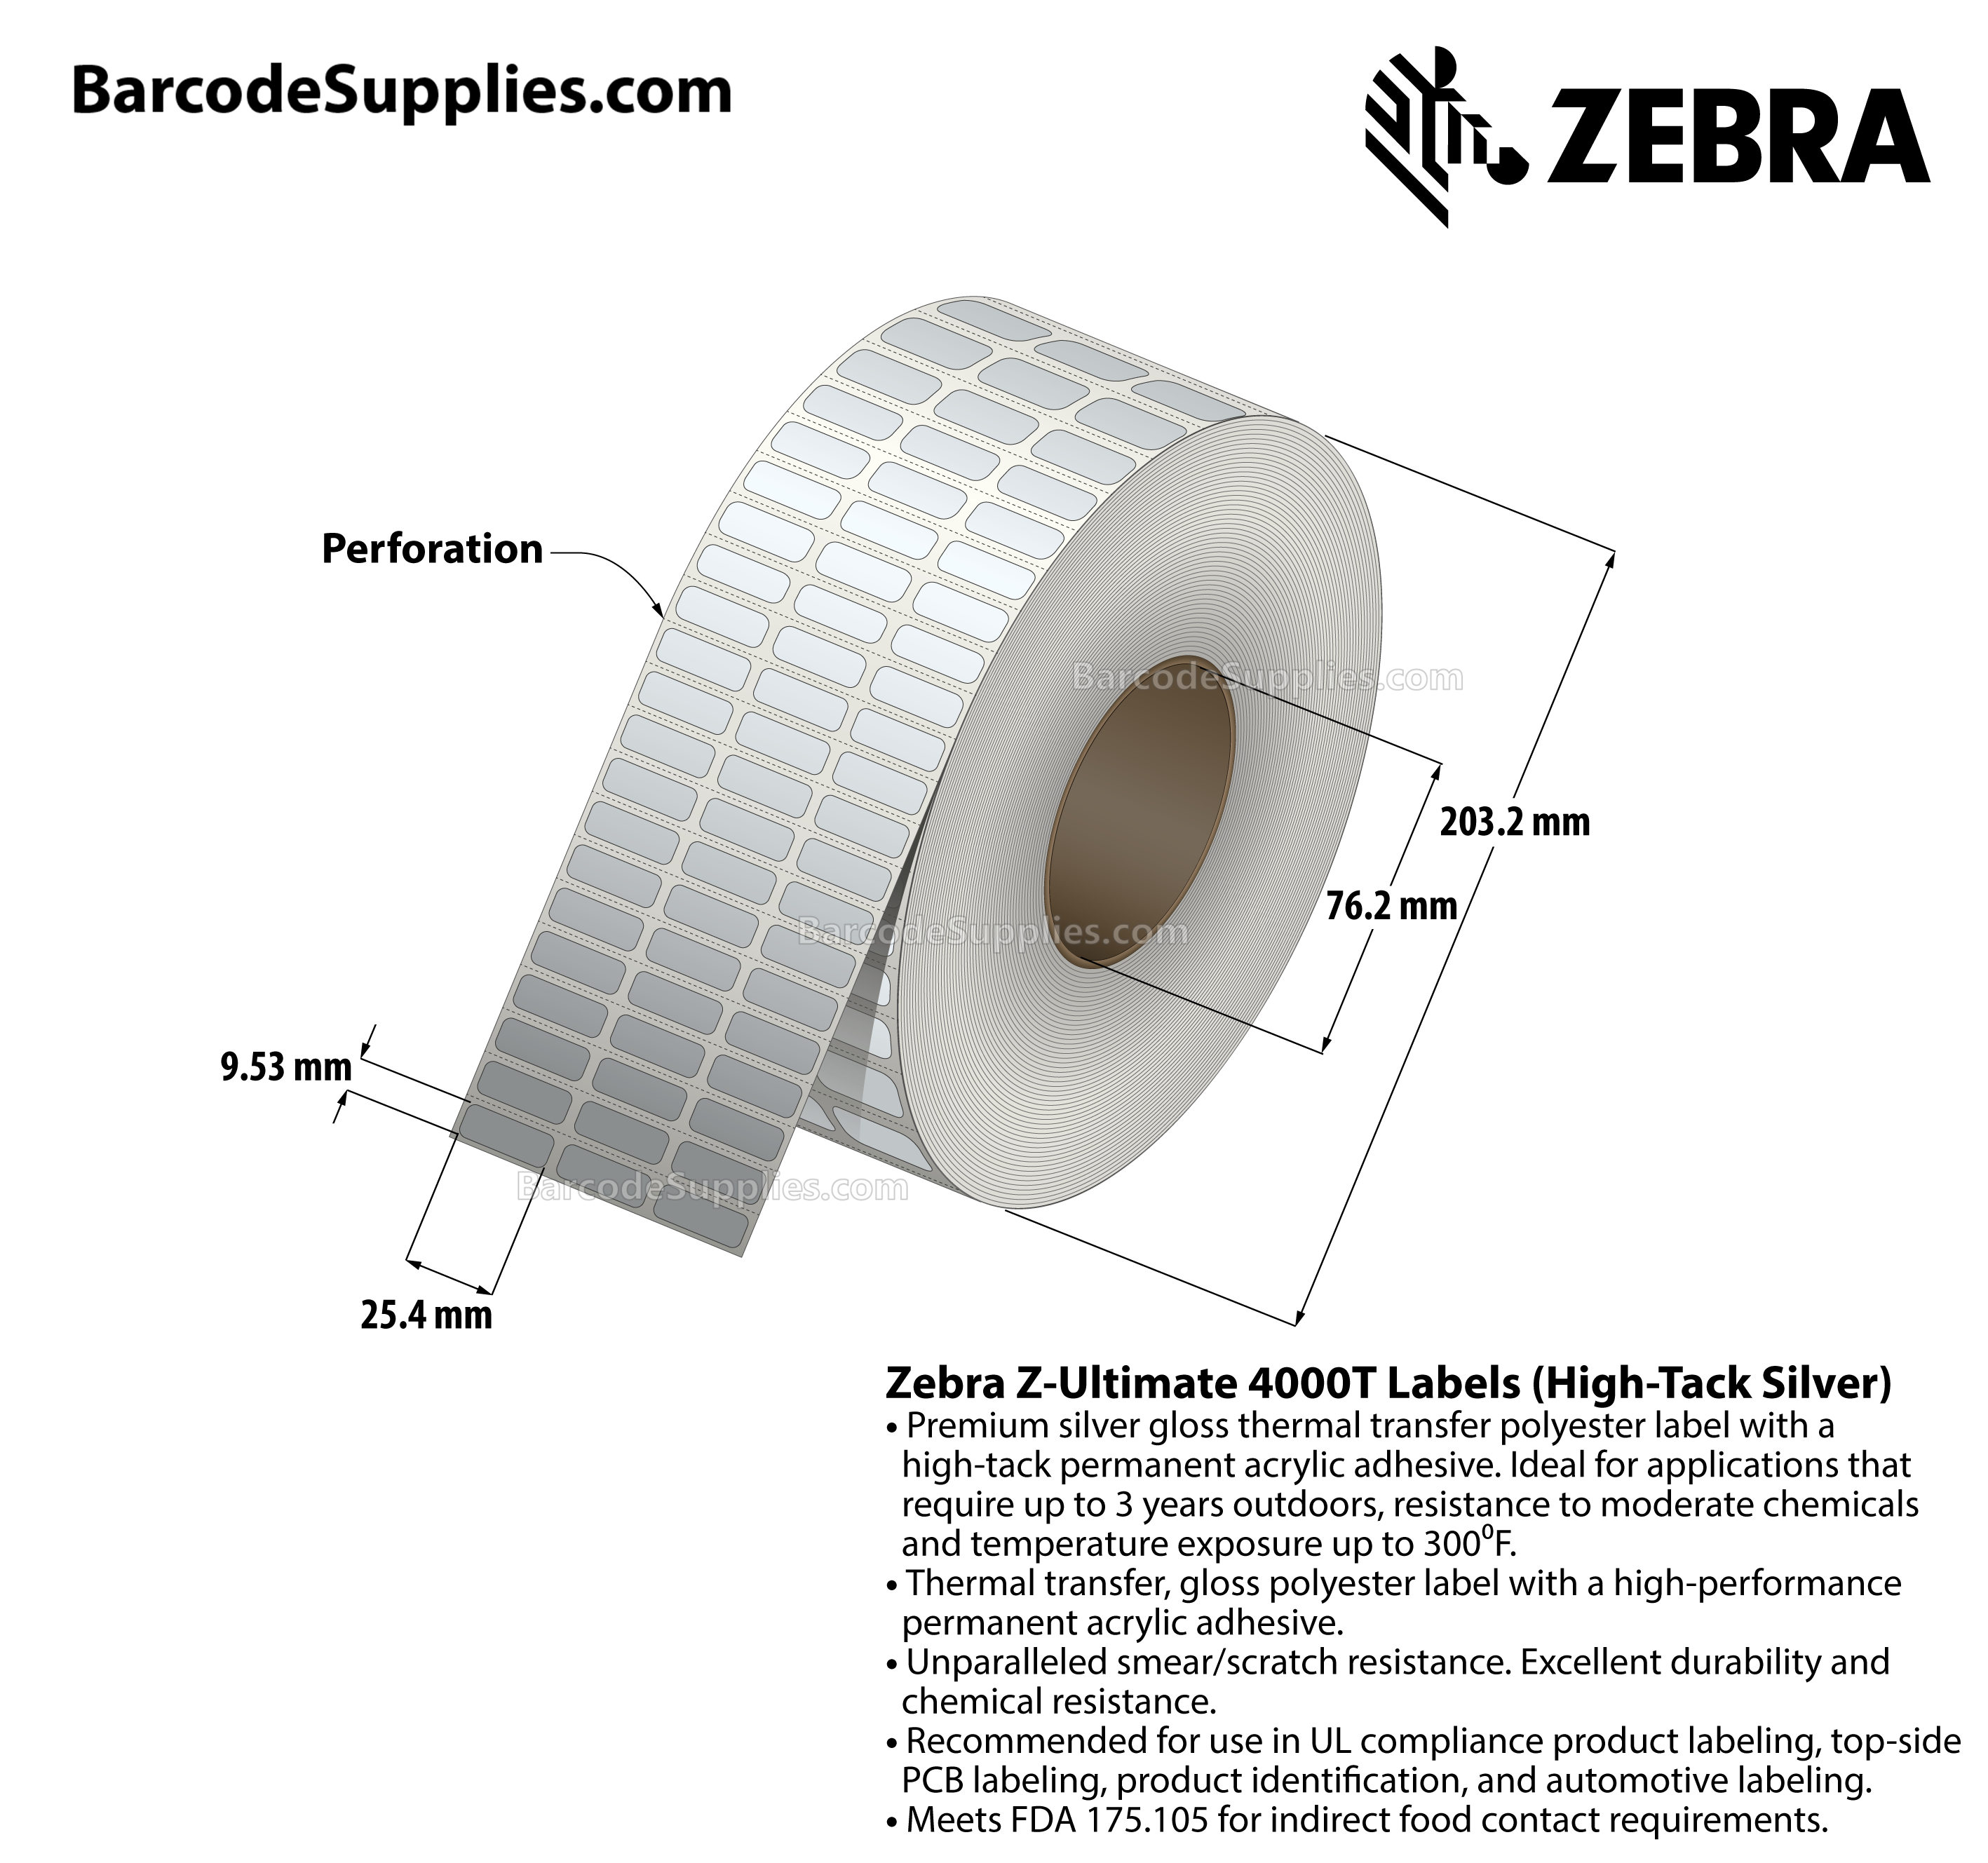 1 x 0.375 Thermal Transfer Silver Z-Ultimate 4000T High-Tack Silver (3-Across) Labels With High-tack Adhesive - Perforated - 10002 Labels Per Roll - Carton Of 1 Rolls - 10002 Labels Total - MPN: 10021222